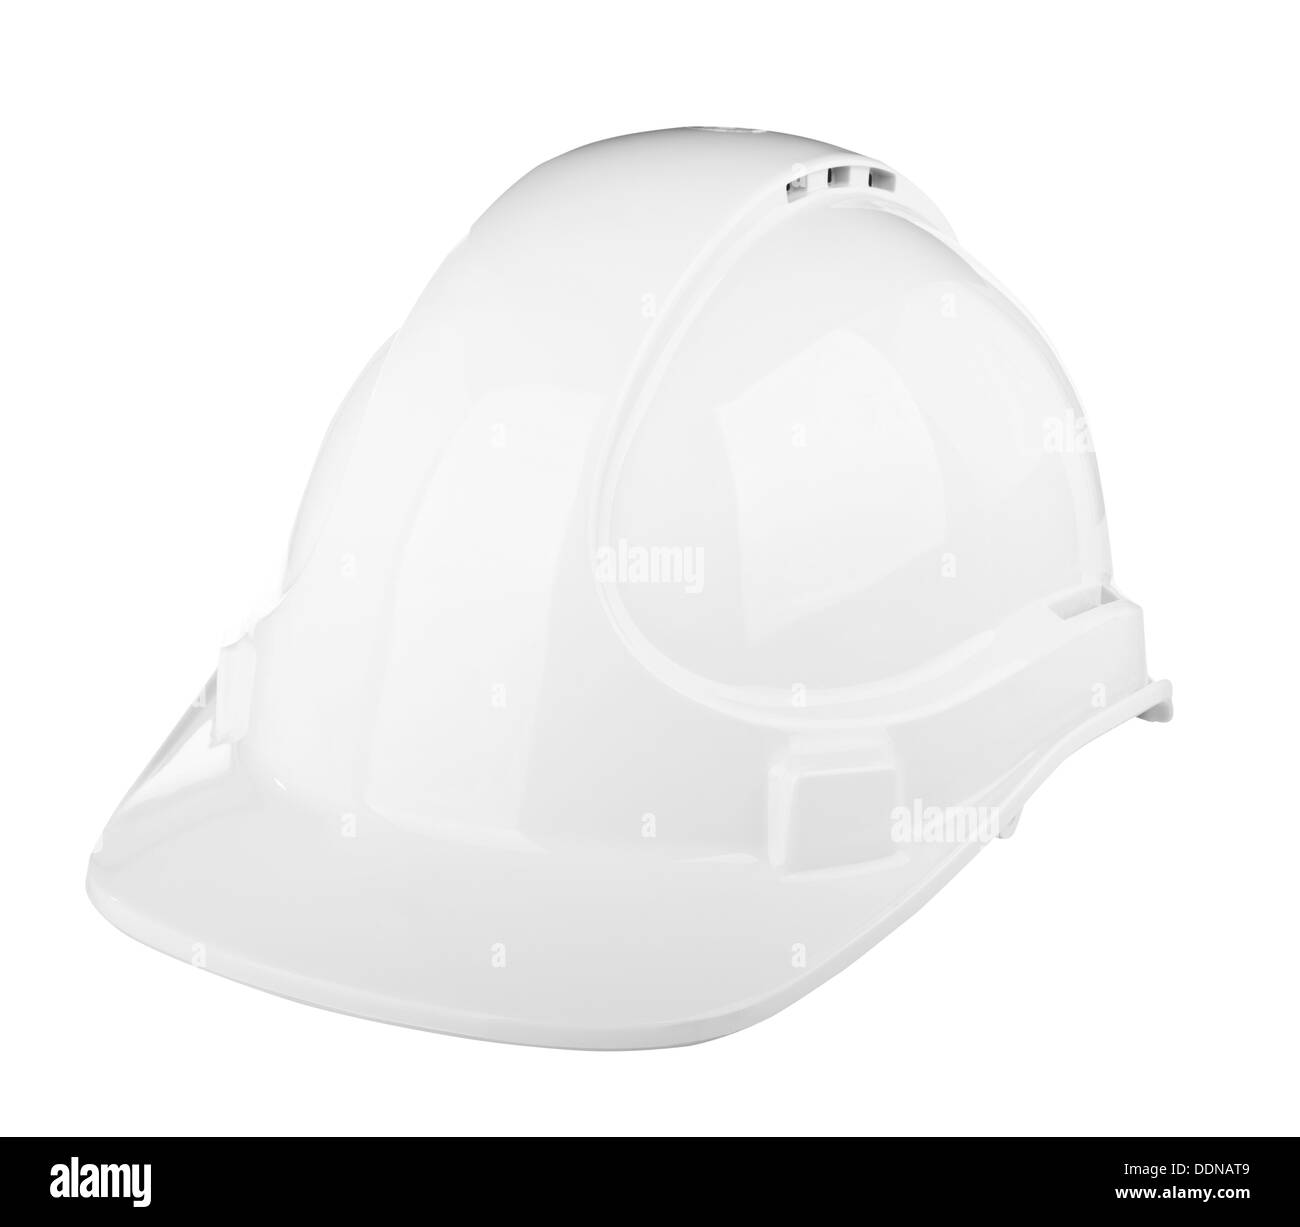 Hard hat used on construction site in white isolated on white Stock Photo